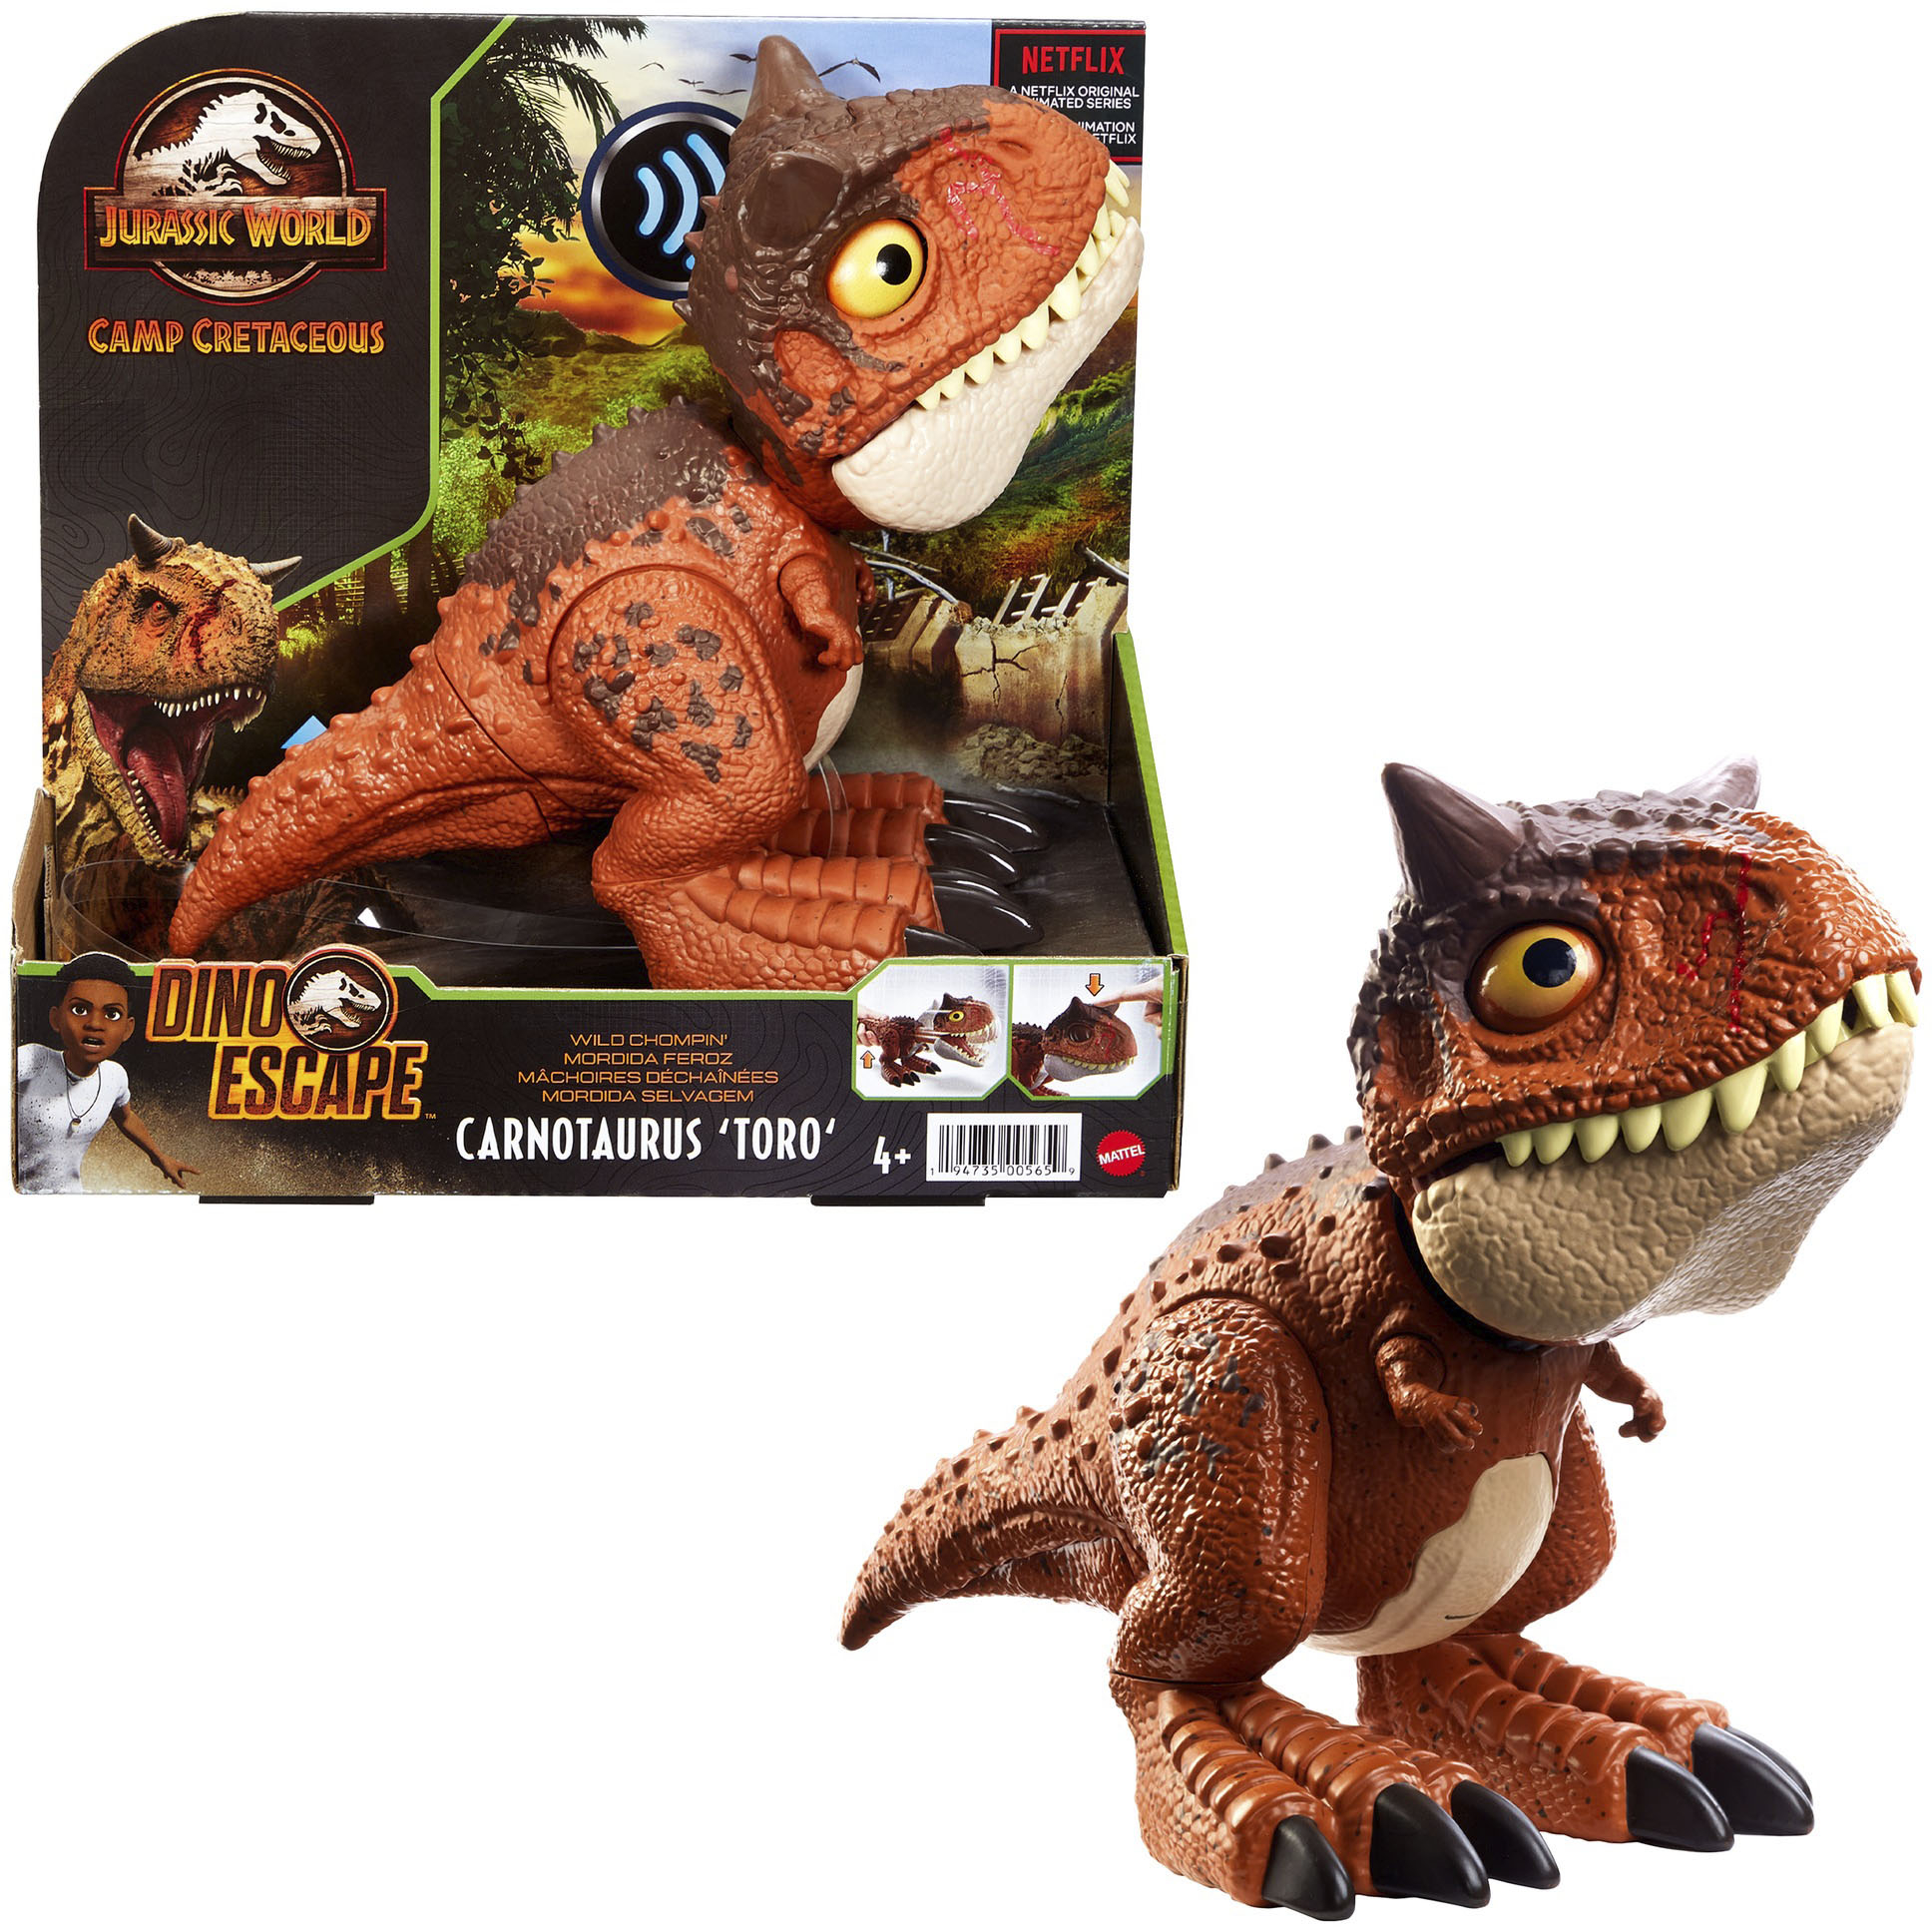 Left View: Jurassic World Camp Cretaceous Chompin’ Carnotaurus Toro Dinosaur Action Figure, Toy Gift with Button-Activated Chomping and Other Motion